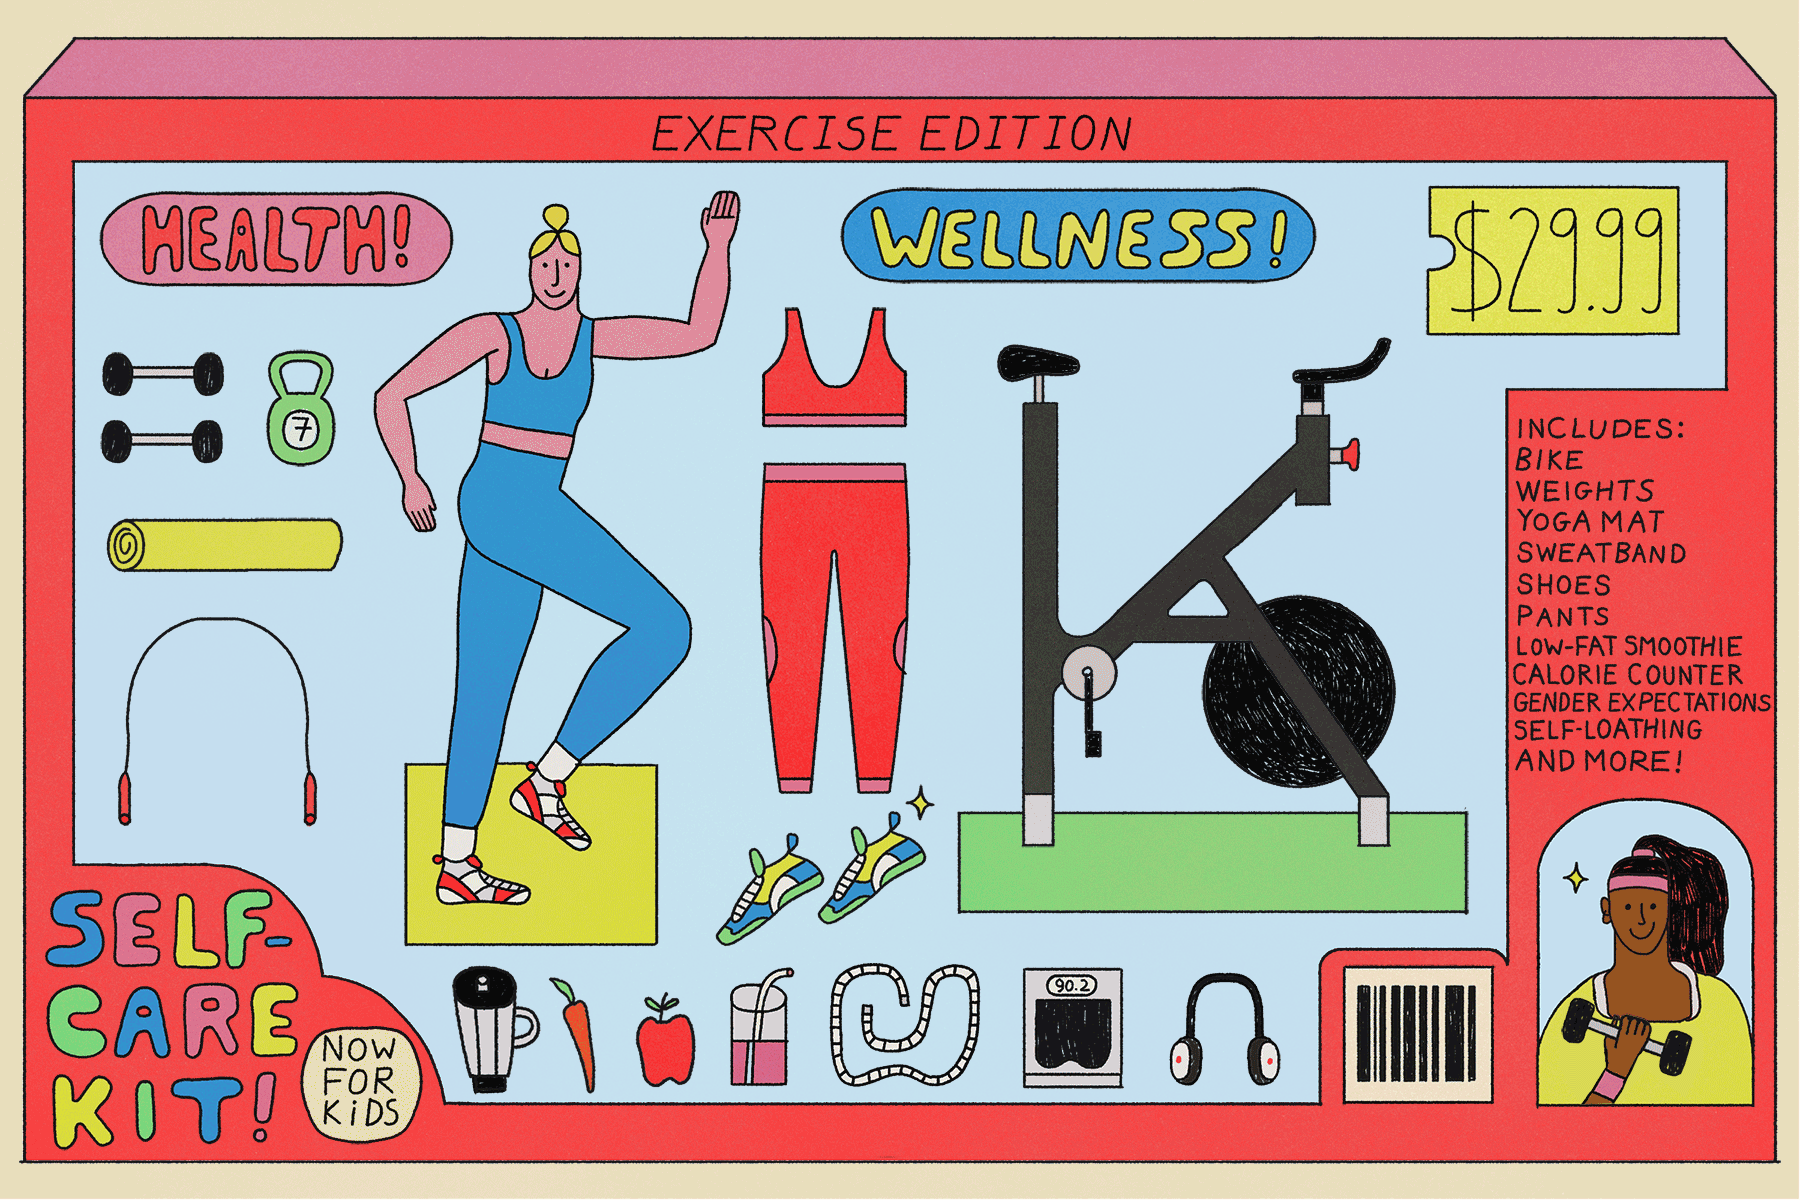 Illustration of a "self care kit" that includes a pelaton, exercise barbie and workout gear 